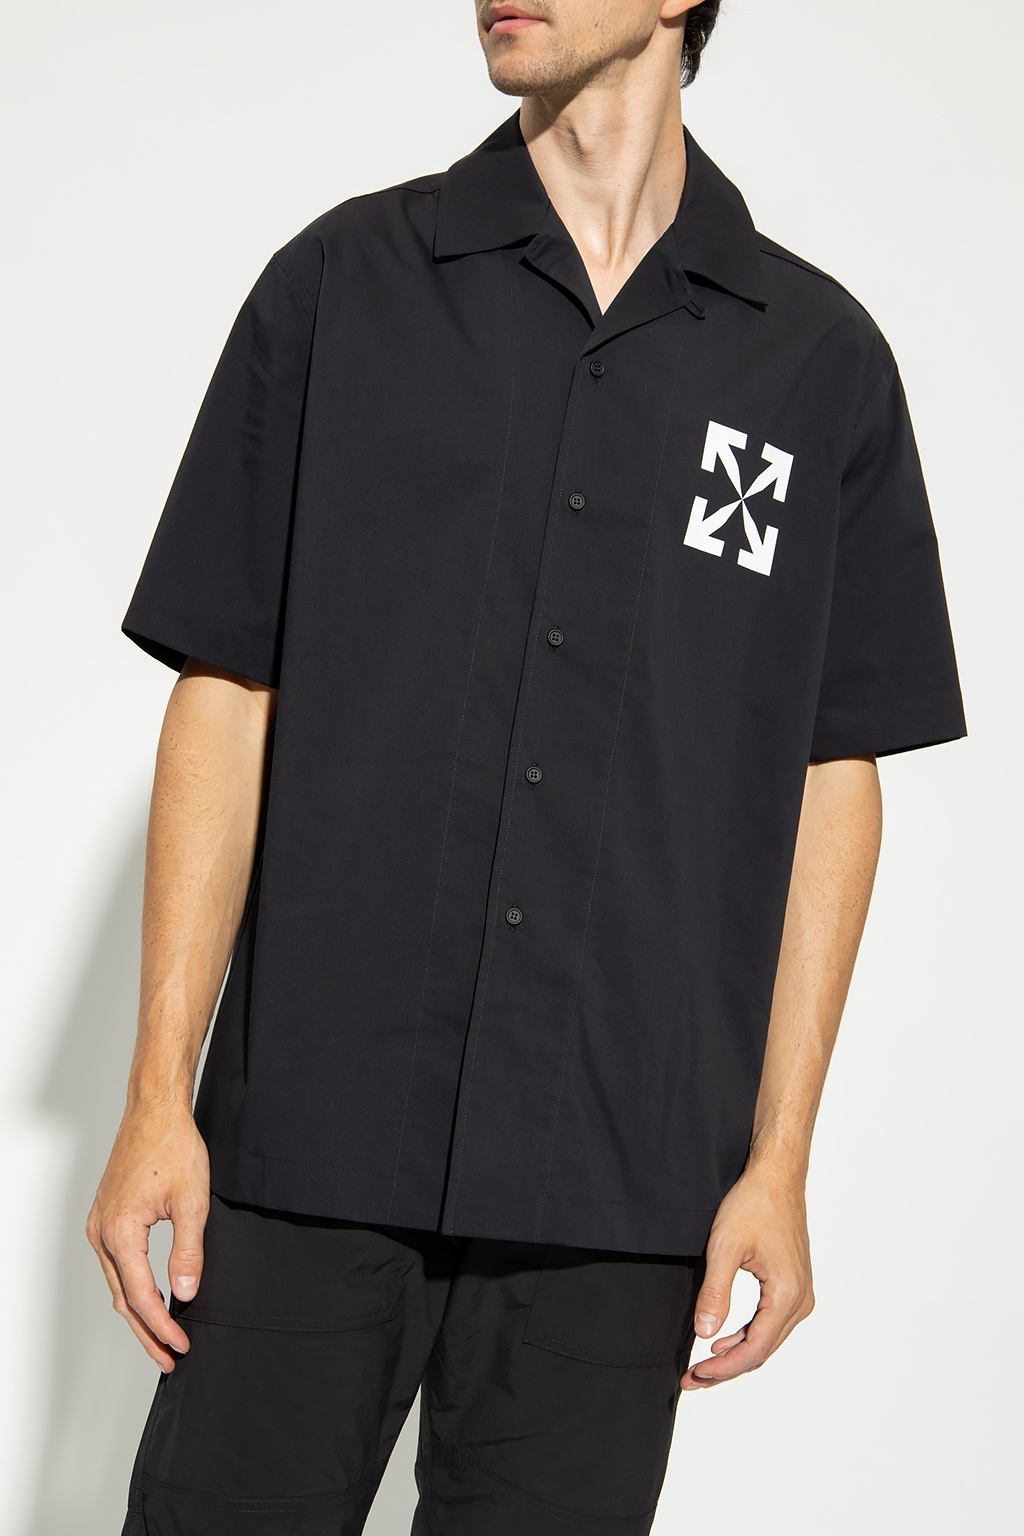 Off-White Looney Patagonia with short sleeves